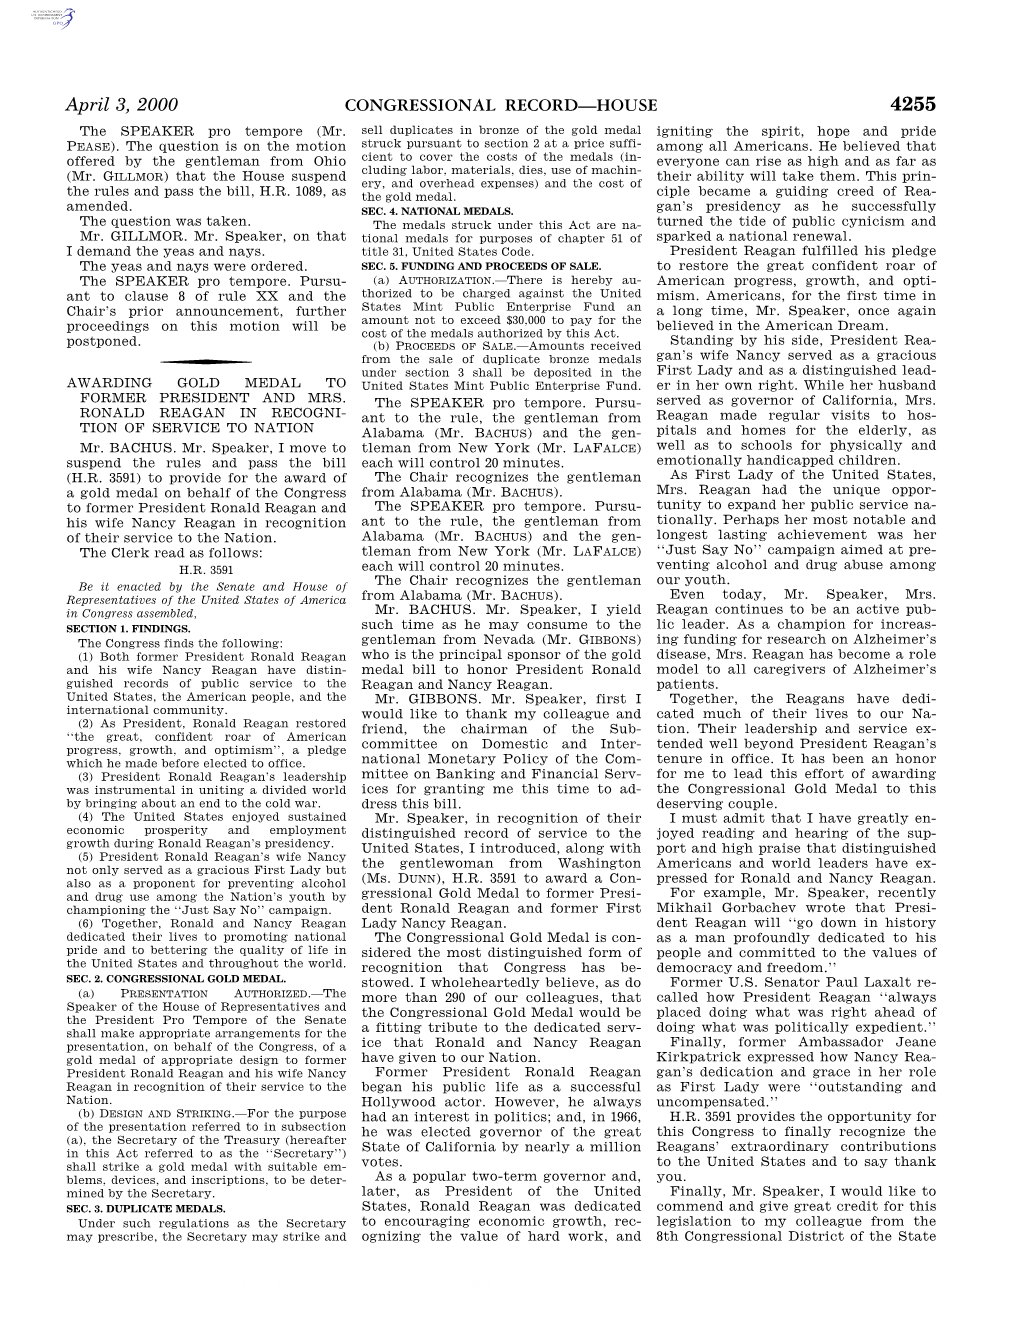 CONGRESSIONAL RECORD—HOUSE April 3, 2000